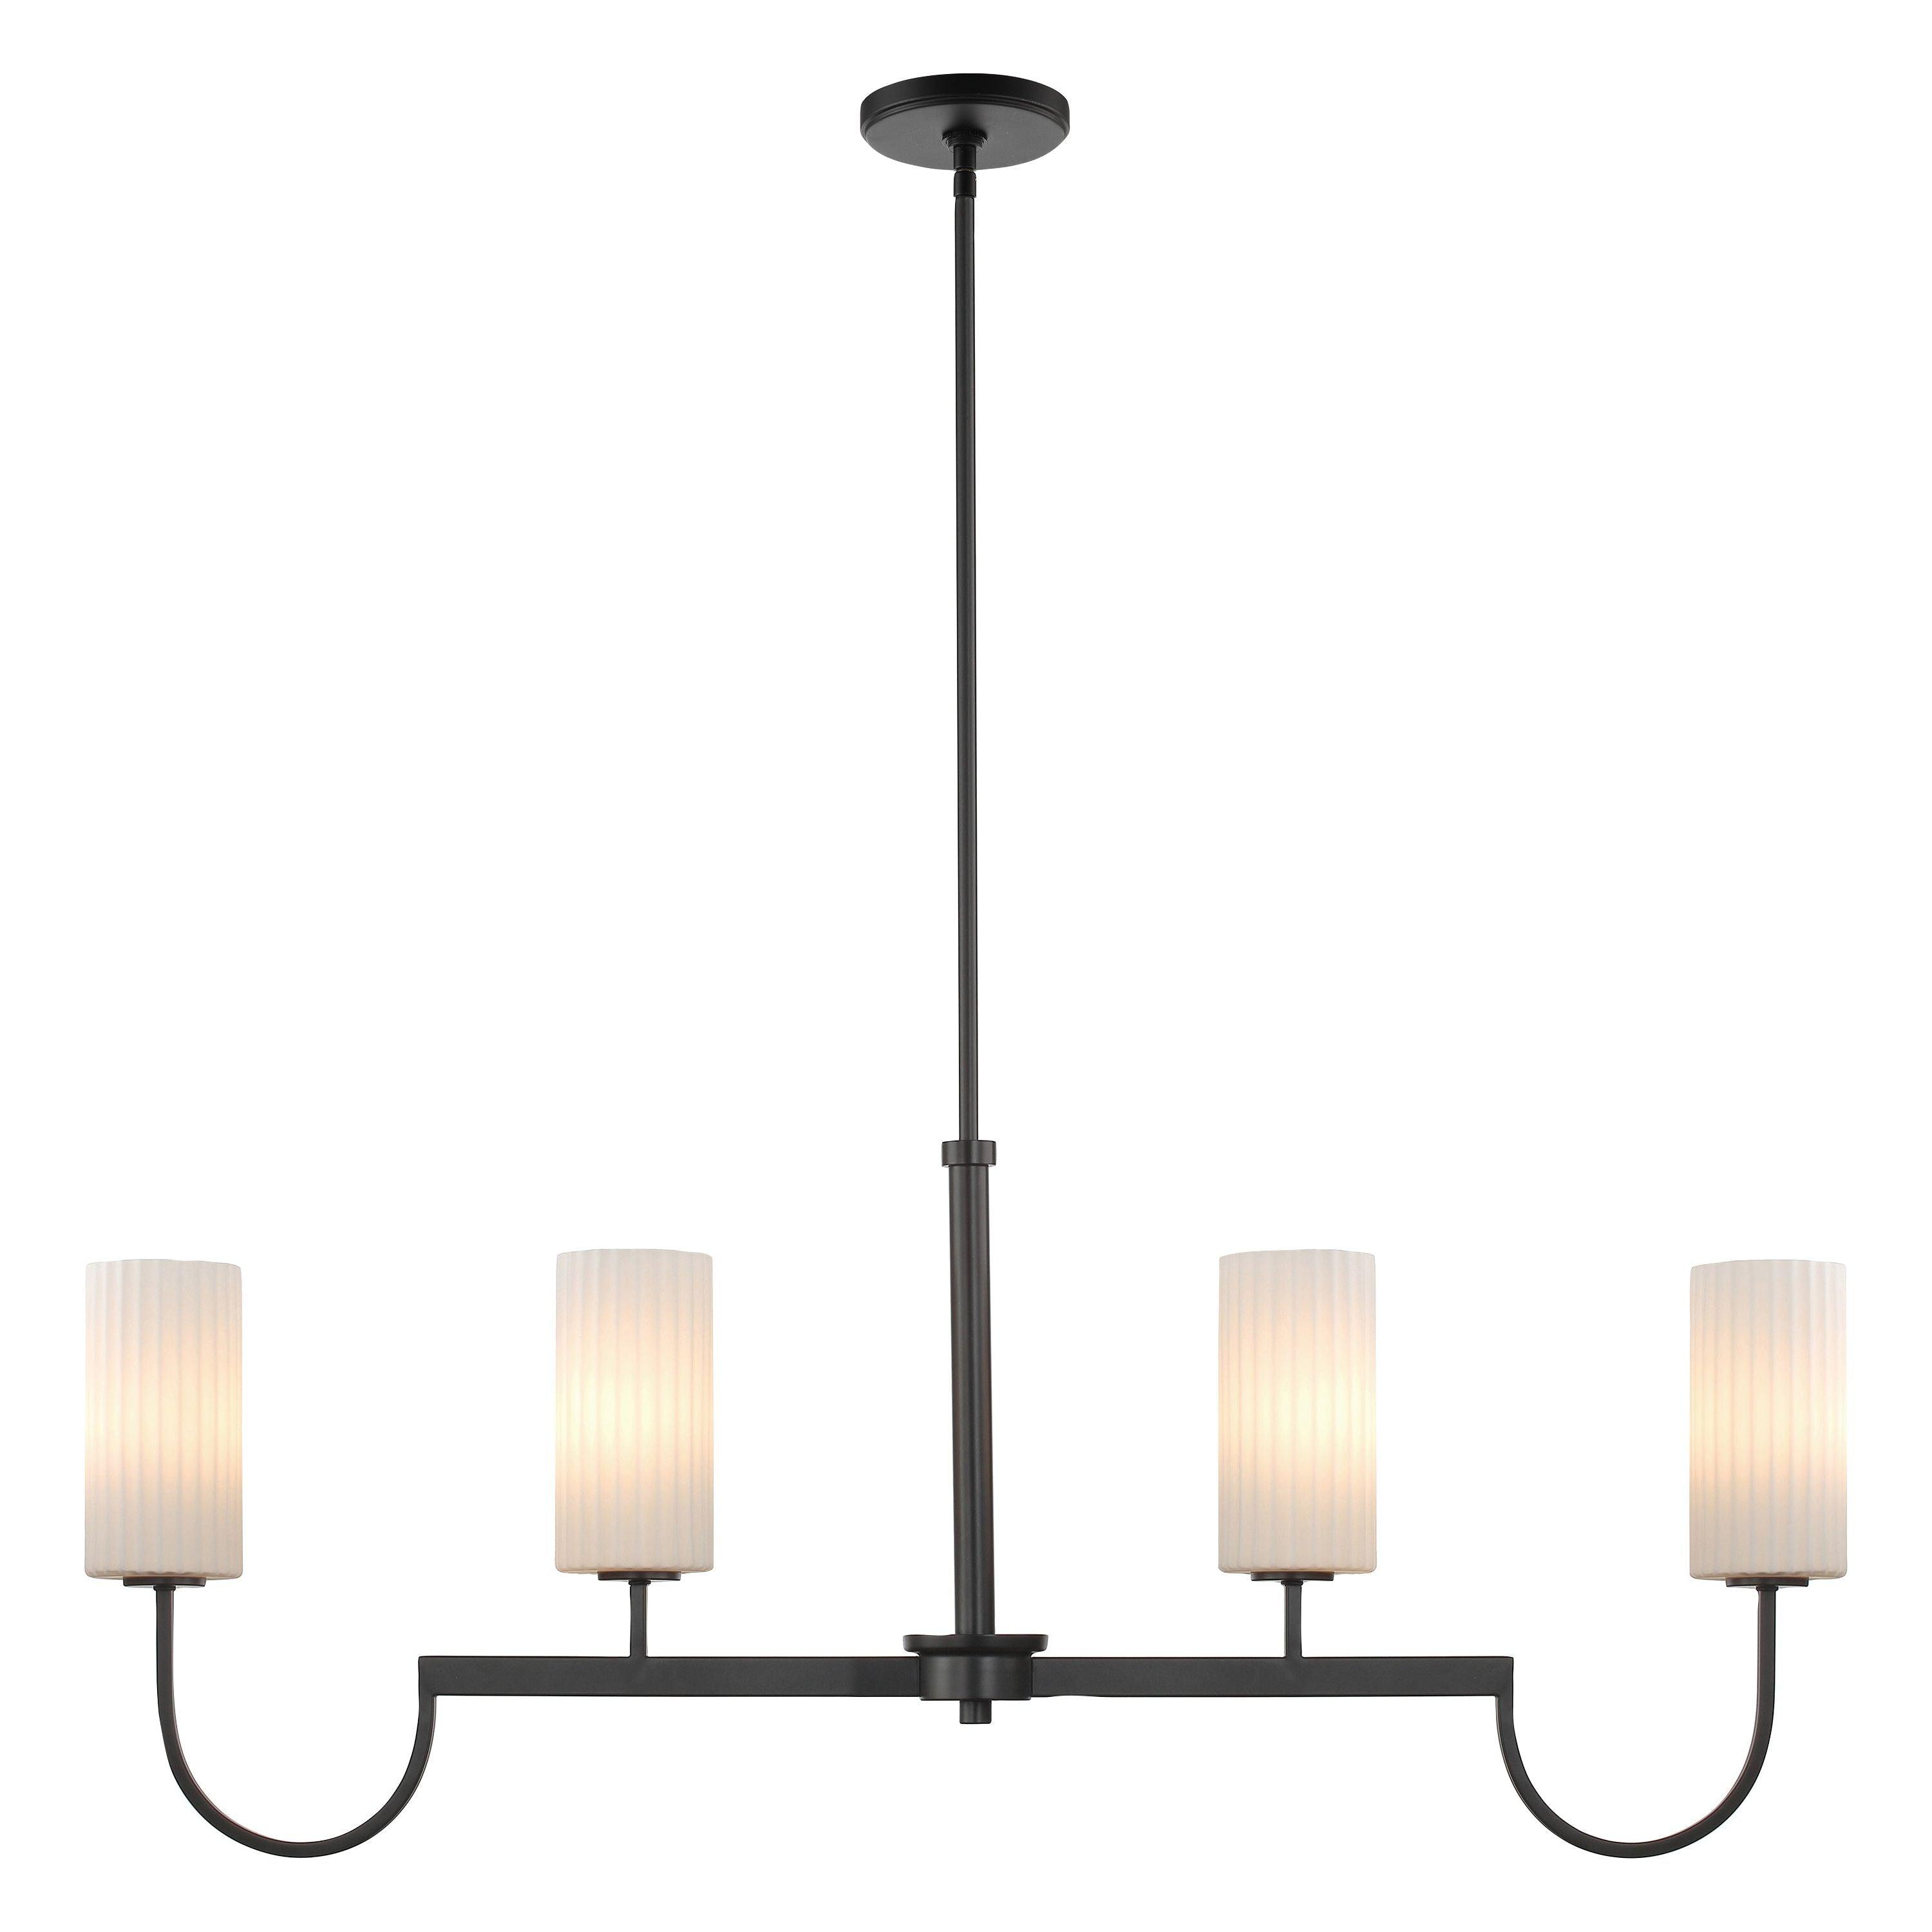 Maxim Lighting - Town & Country 4-Light Linear Suspension - Lights Canada